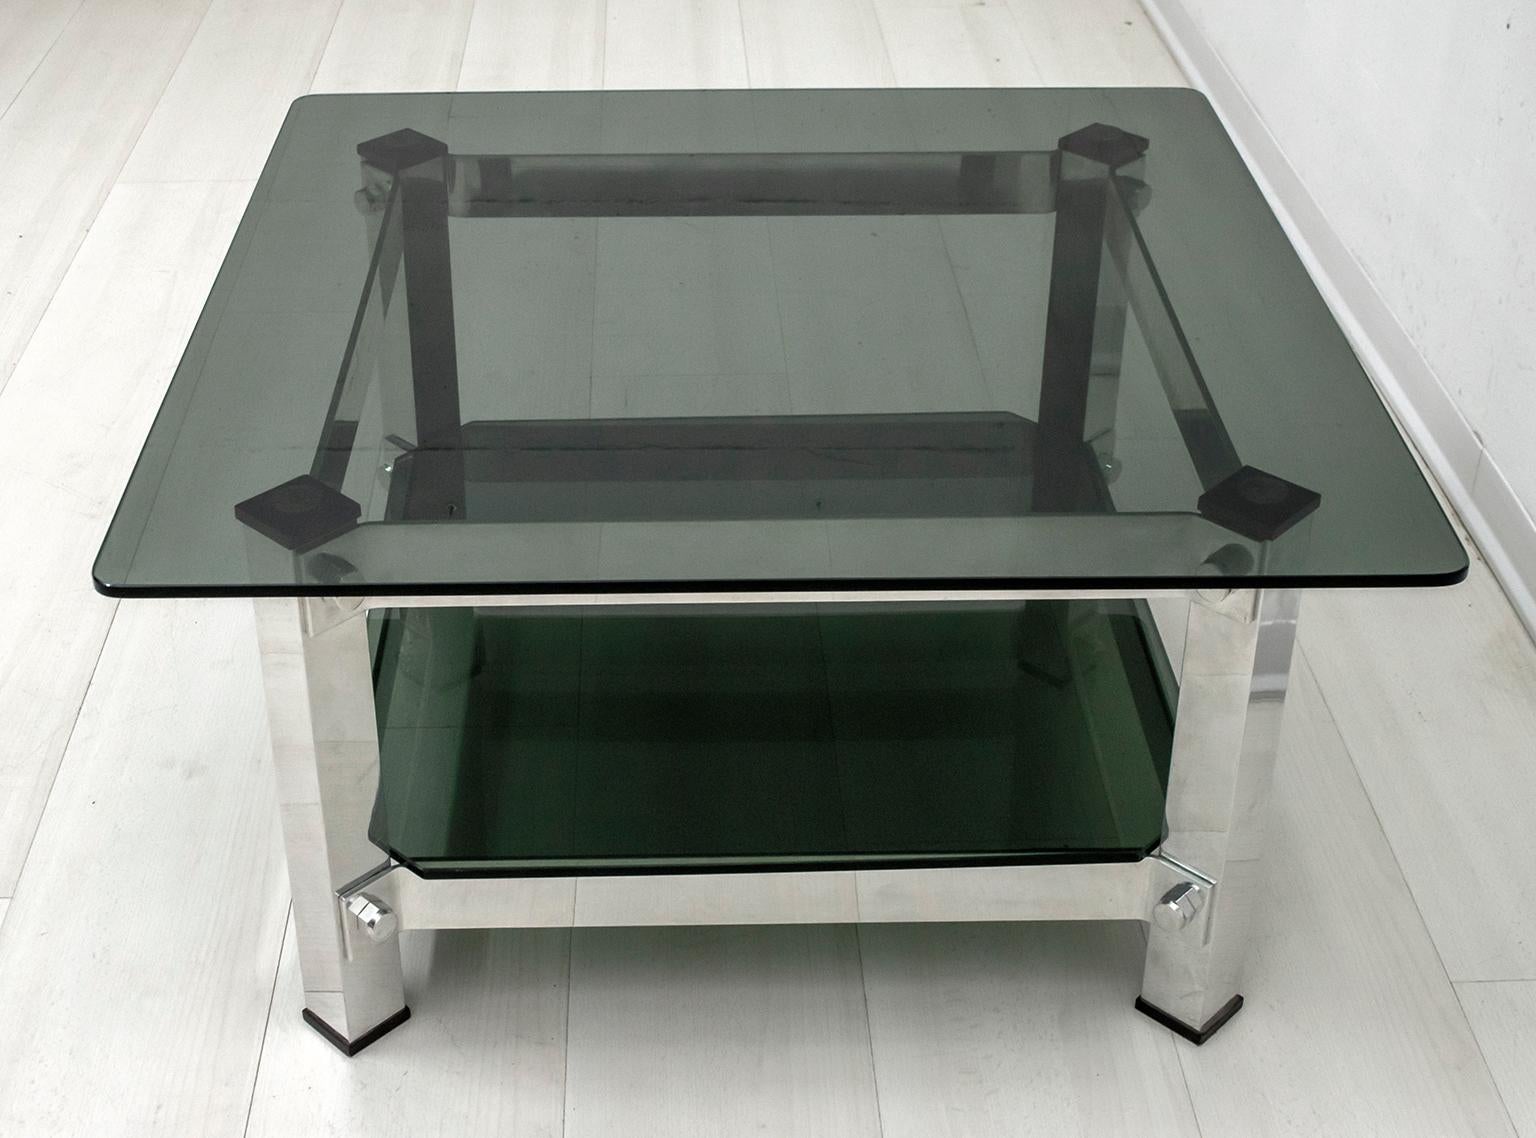 This coffee table was produced in Italy in the 1970s, certainly designed by a great design that we do not know who is among the many who created in that period. In aluminum and dark green glass, it has two shelves.

